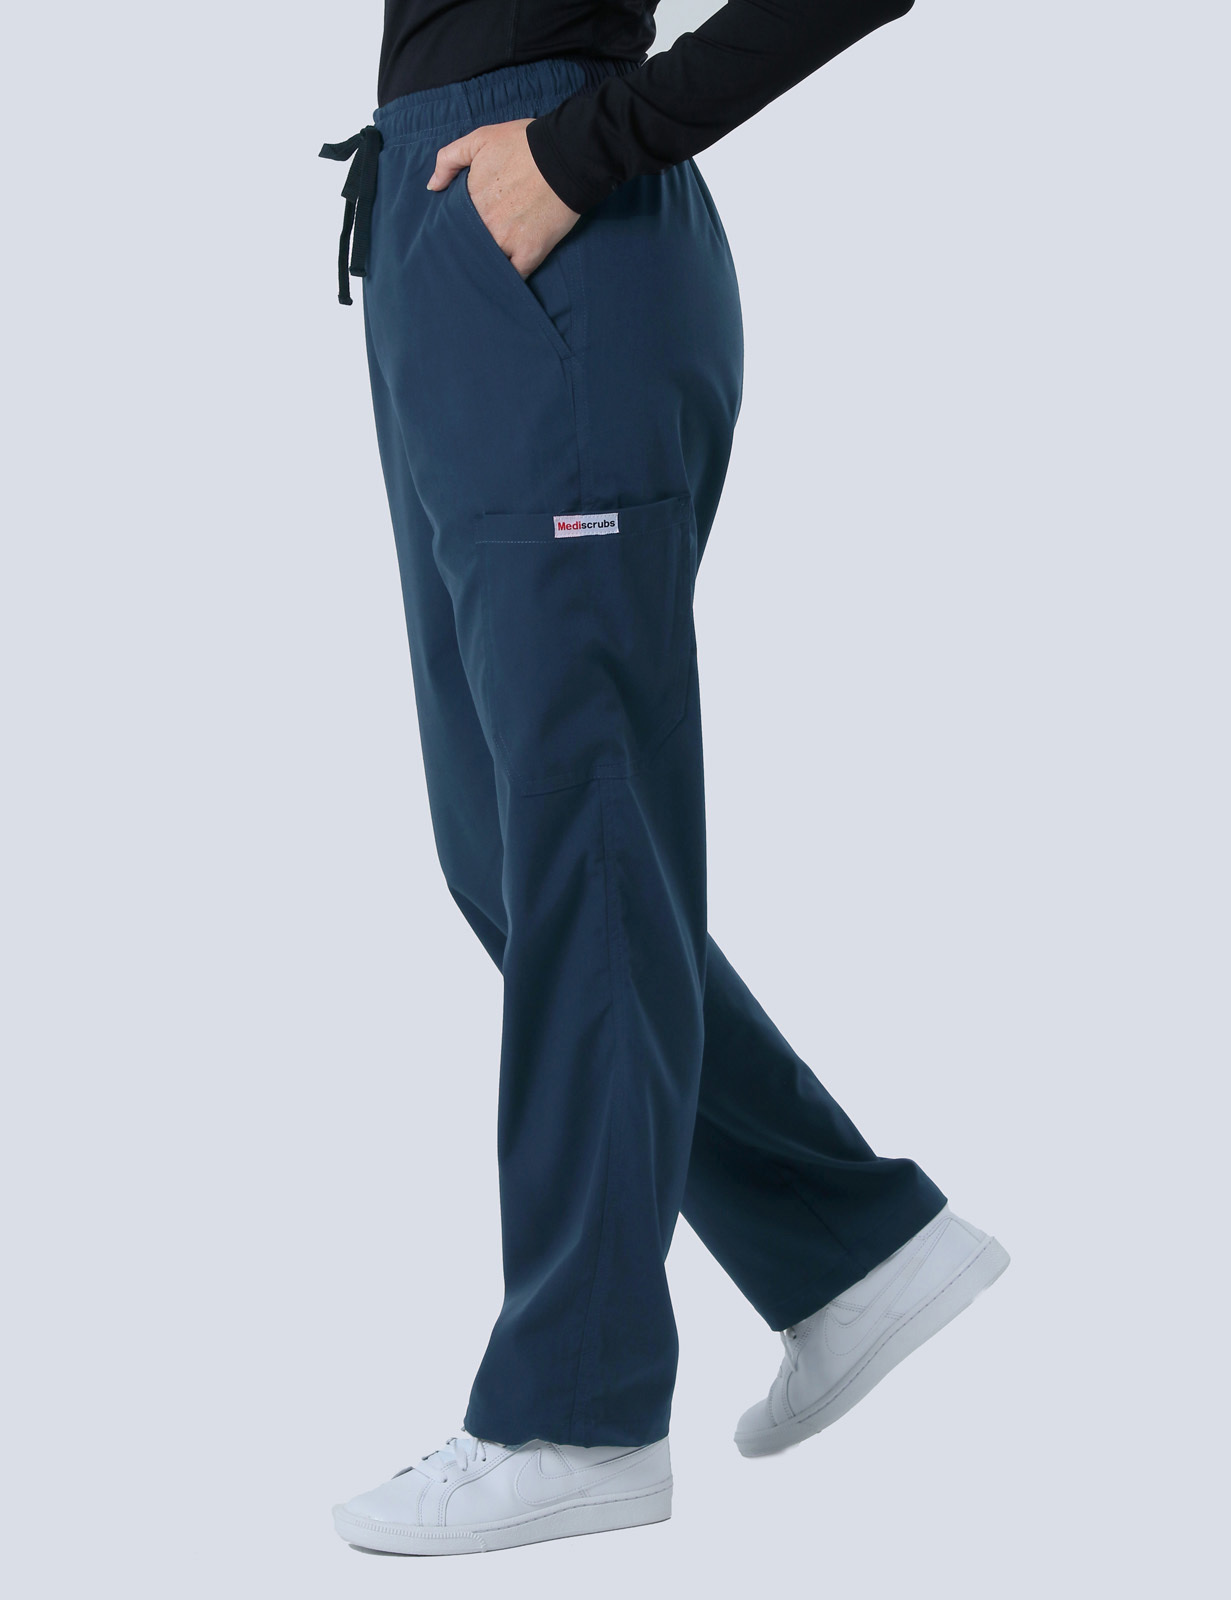 Gympie Hospital - Registered Nurse (Women's Fit Solid Scrub Top and Cargo Pants in Navy incl Logos)